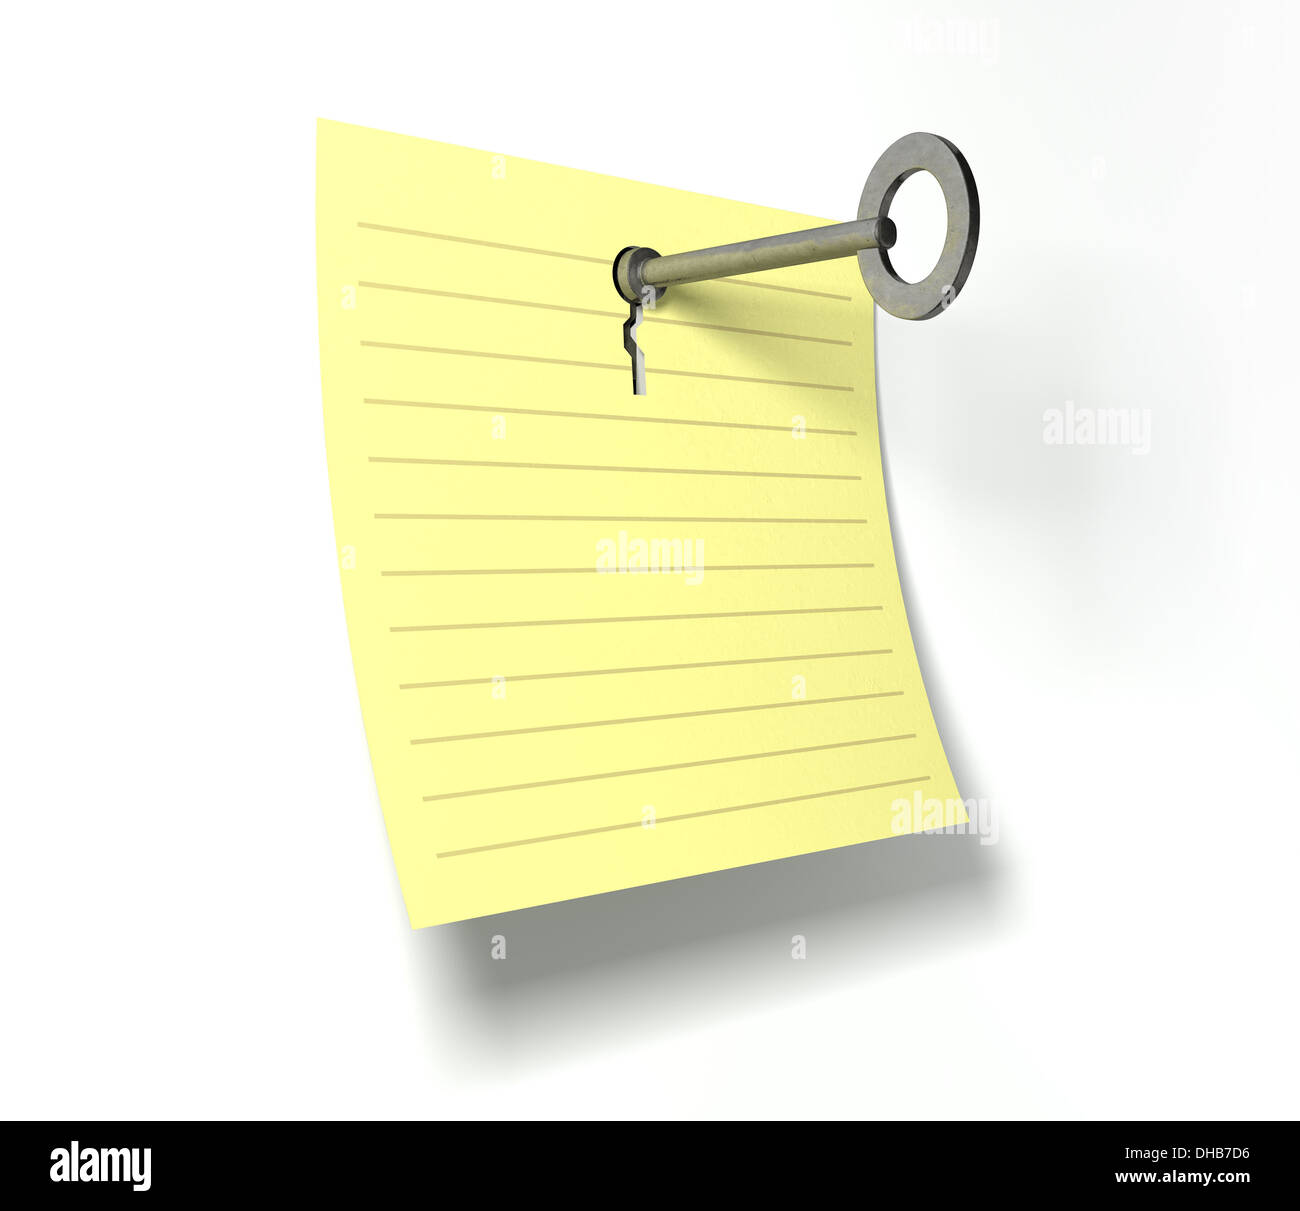 A yellow notepad page peeling upwards with a punched out key hole and a metal key inserted in it on an isolated background Stock Photo